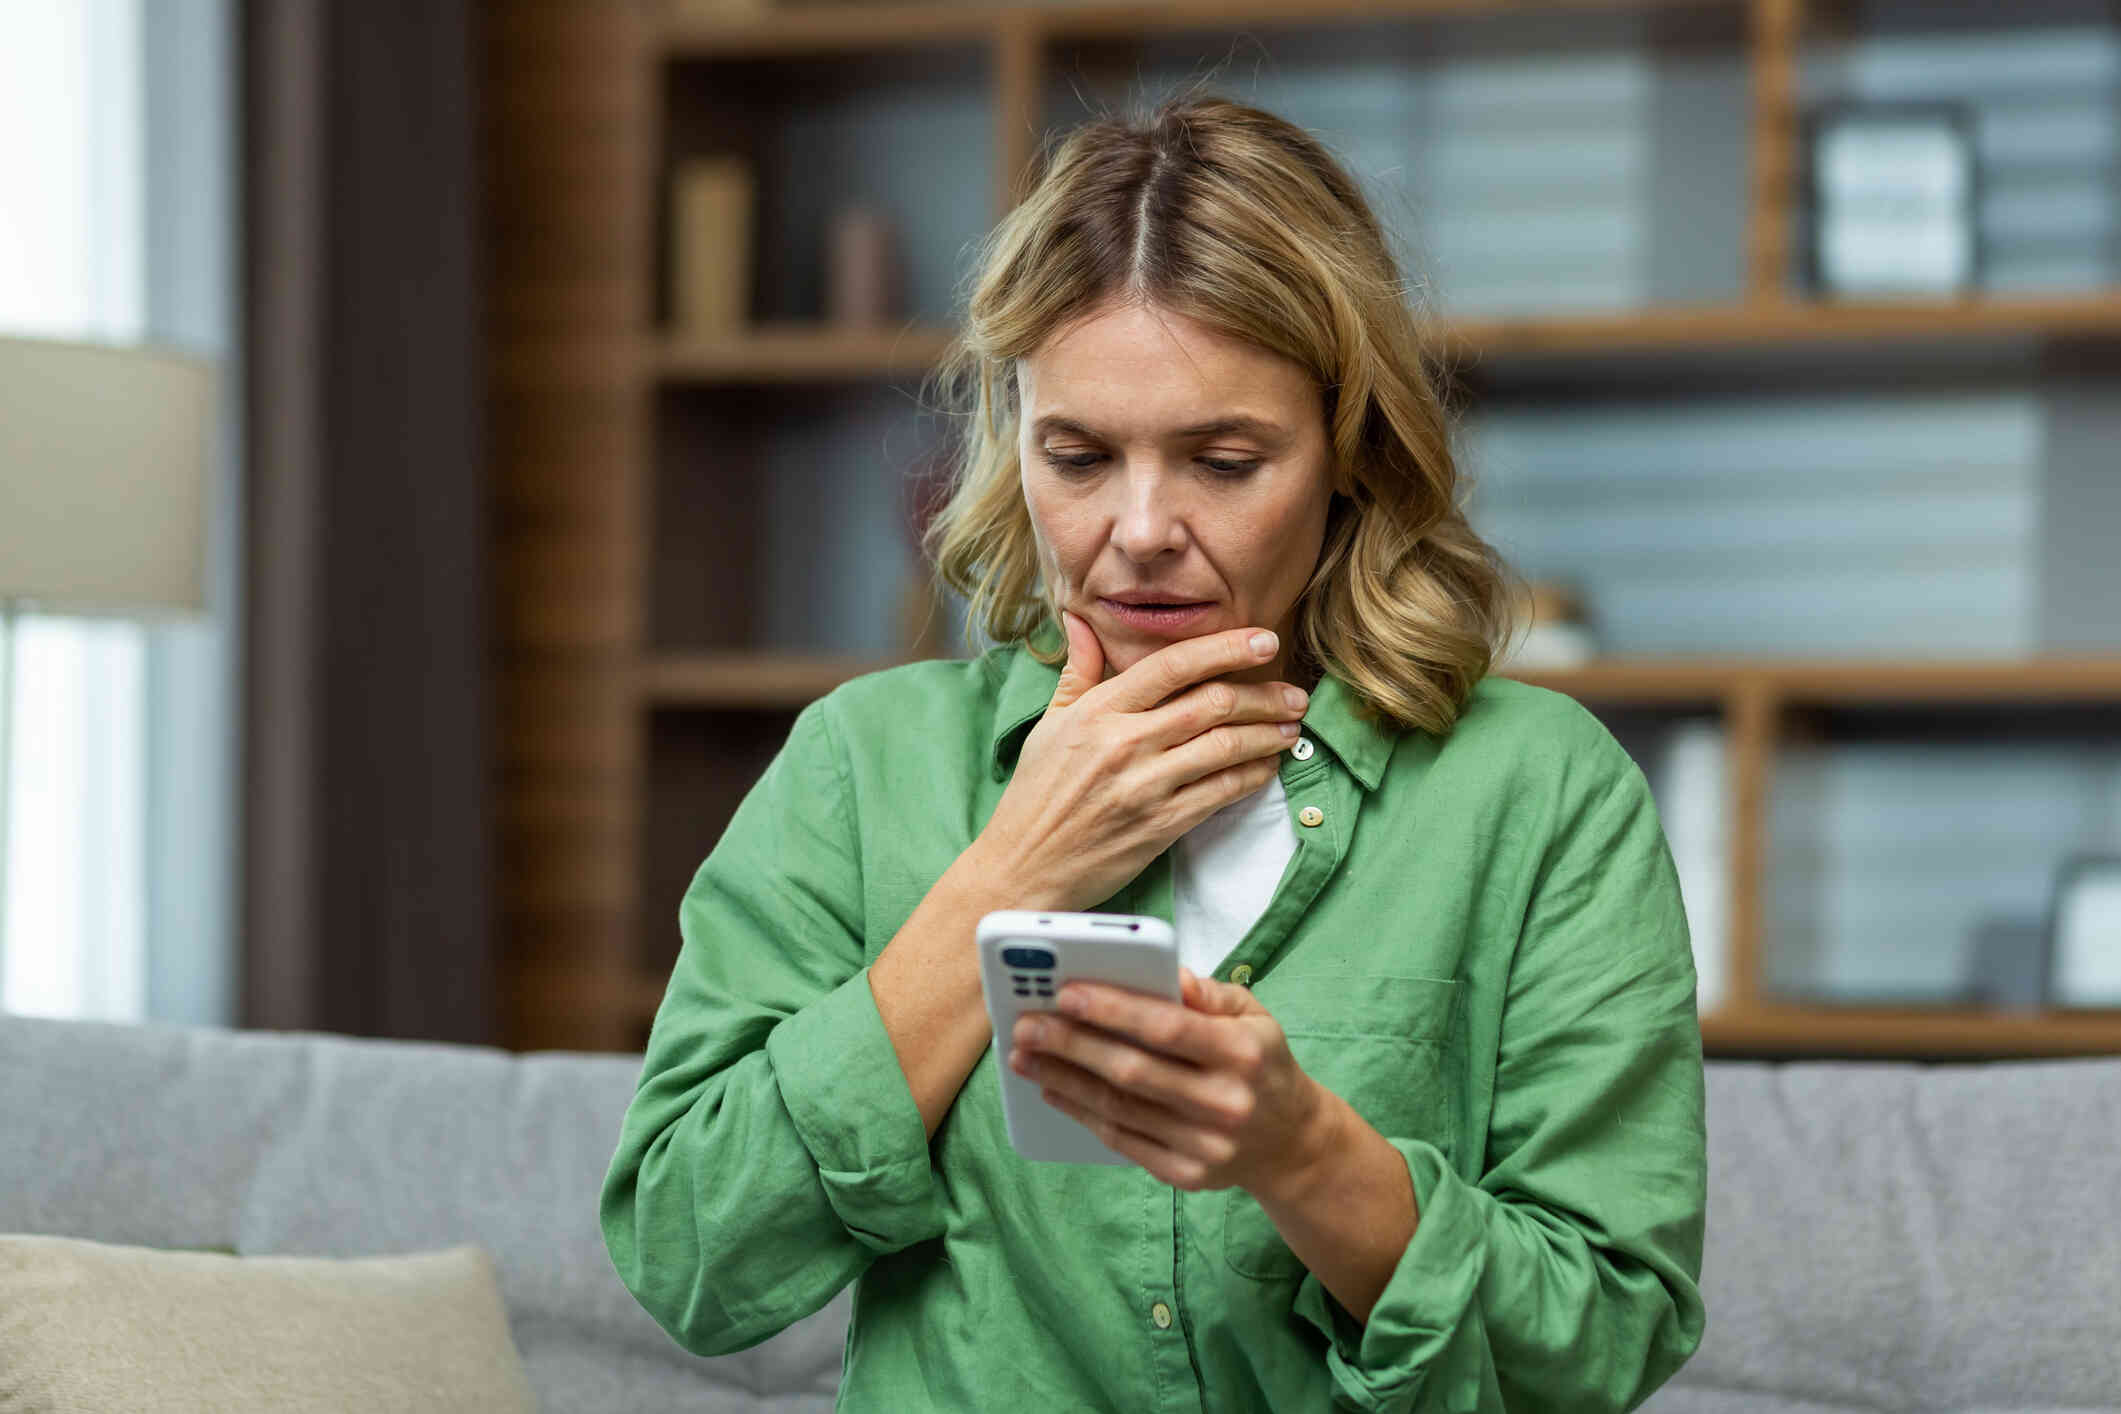 A woman in a green shirt sits on her home and looks down at the cellphone in her hand with a worried expression.